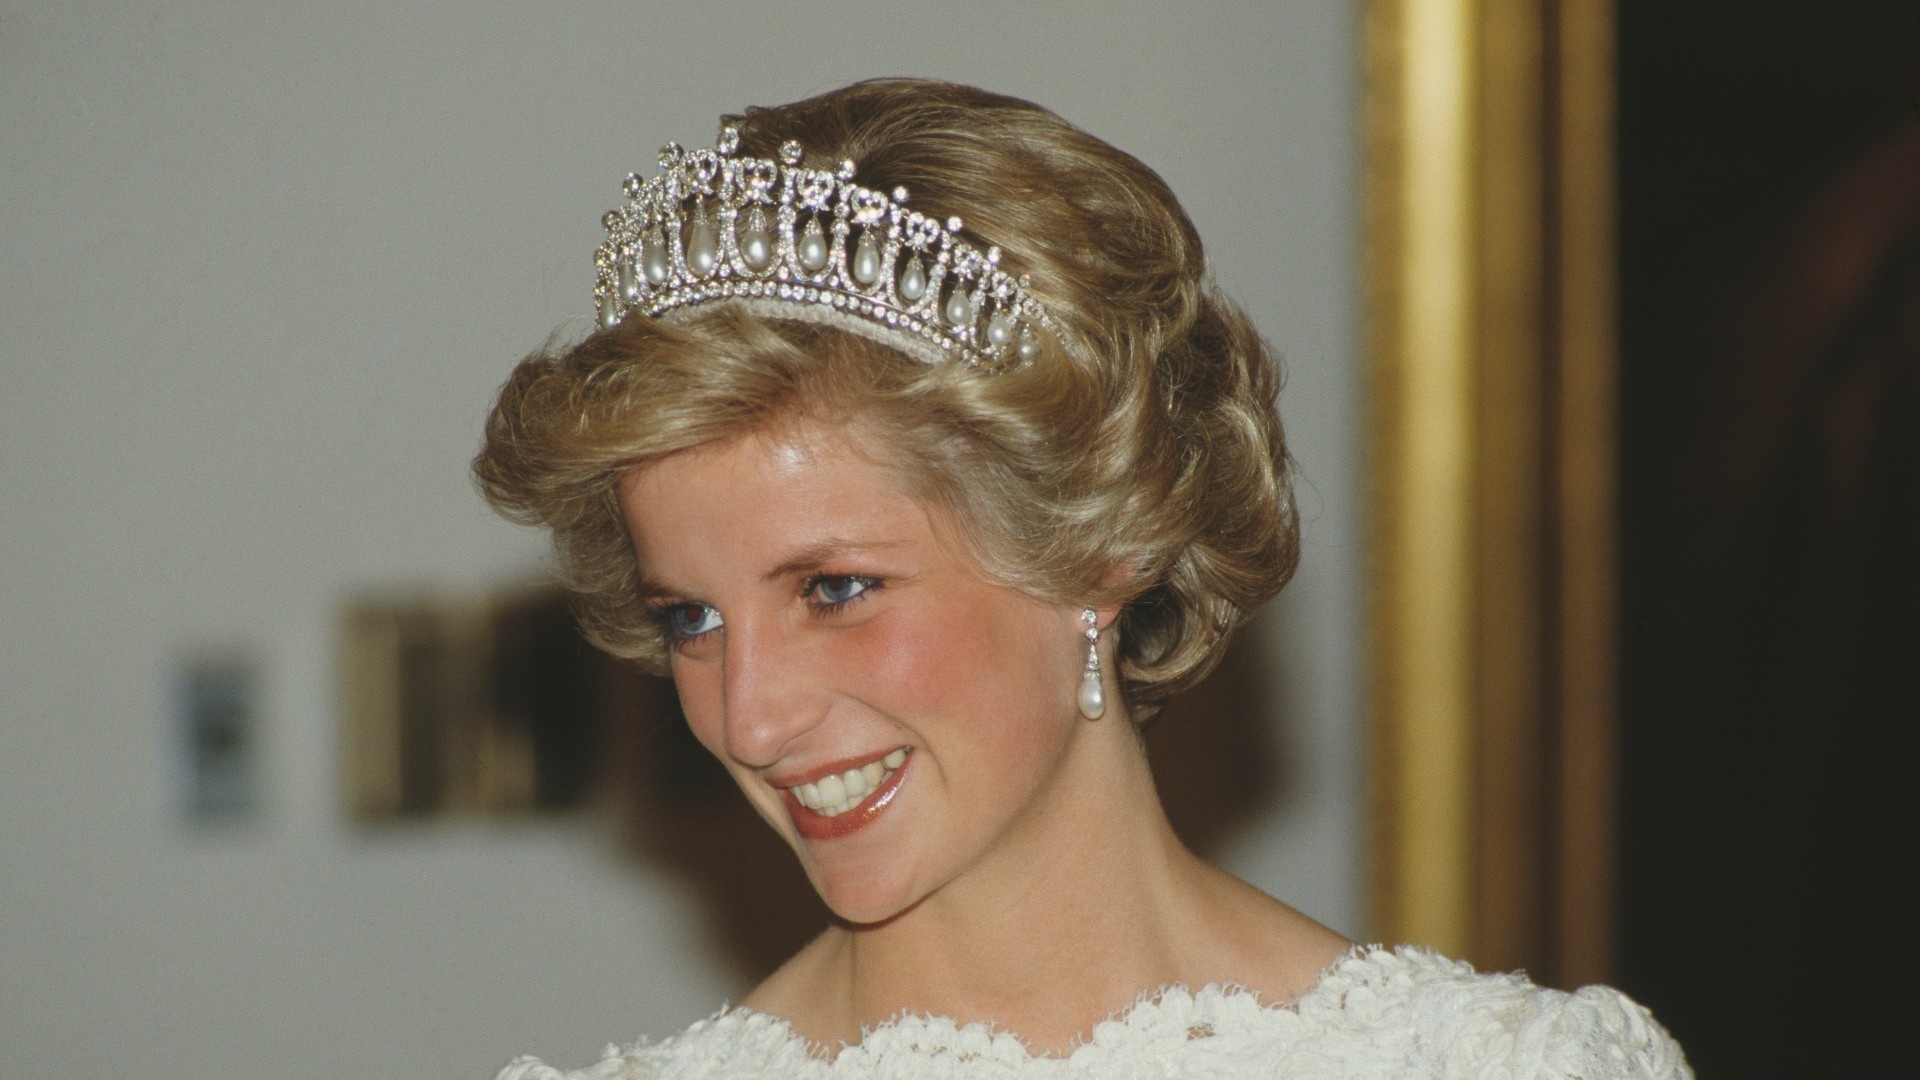 Princess Diana: Diana's activism and glamour made her an international icon and earned her an enduring popularity. 1920x1080 Full HD Background.